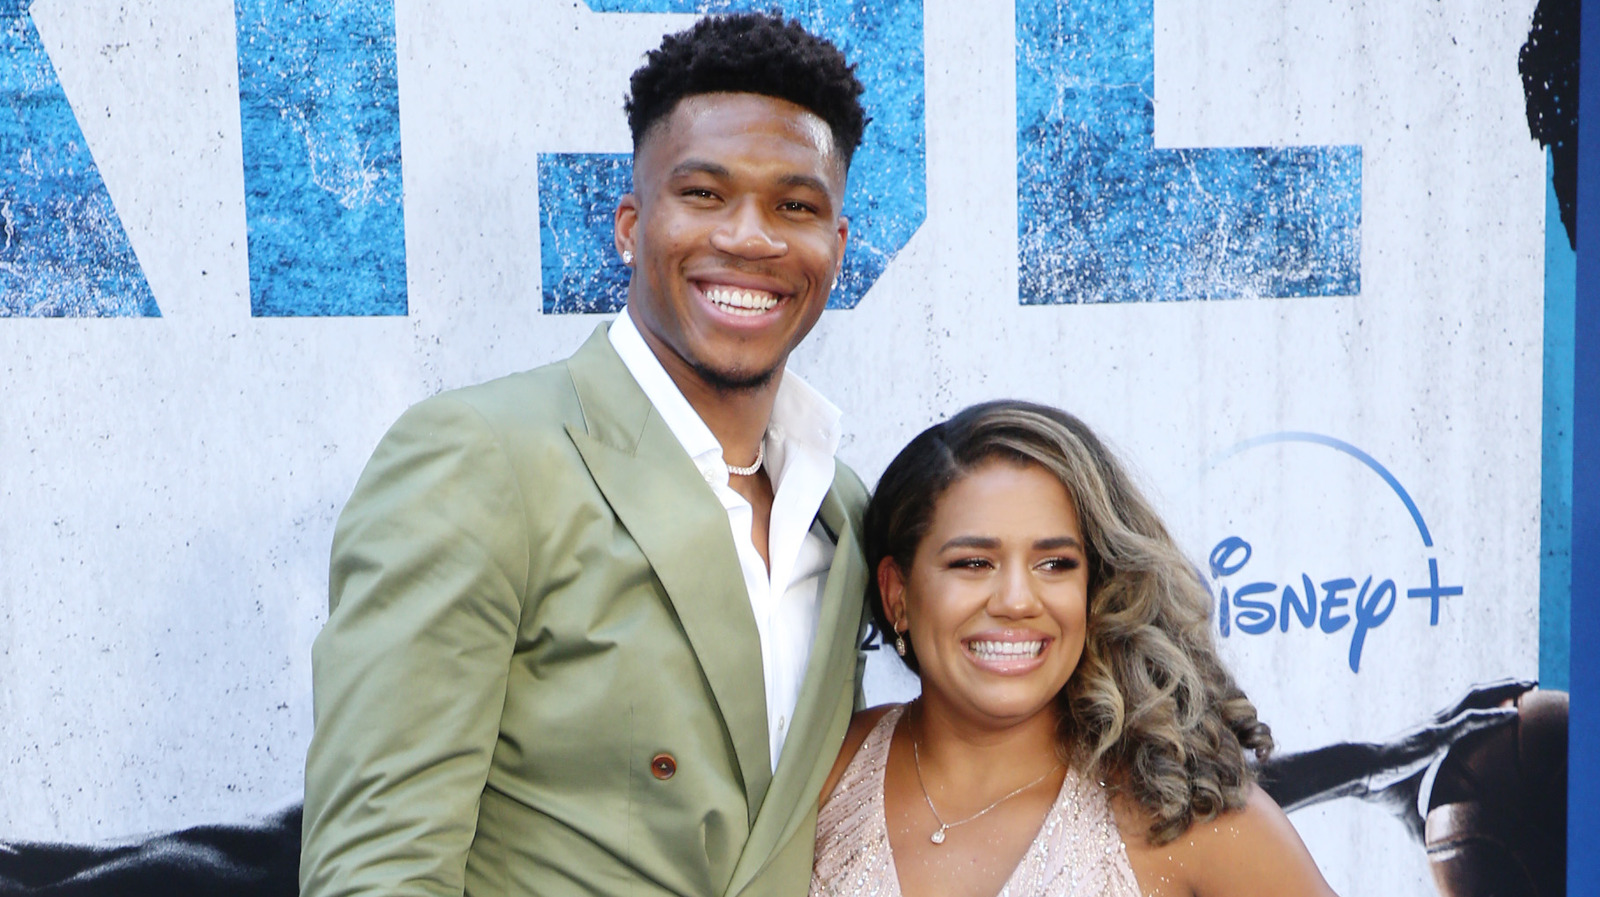 Who Is Giannis Antetokounmpo's Girlfriend? Couple Expecting Second Child